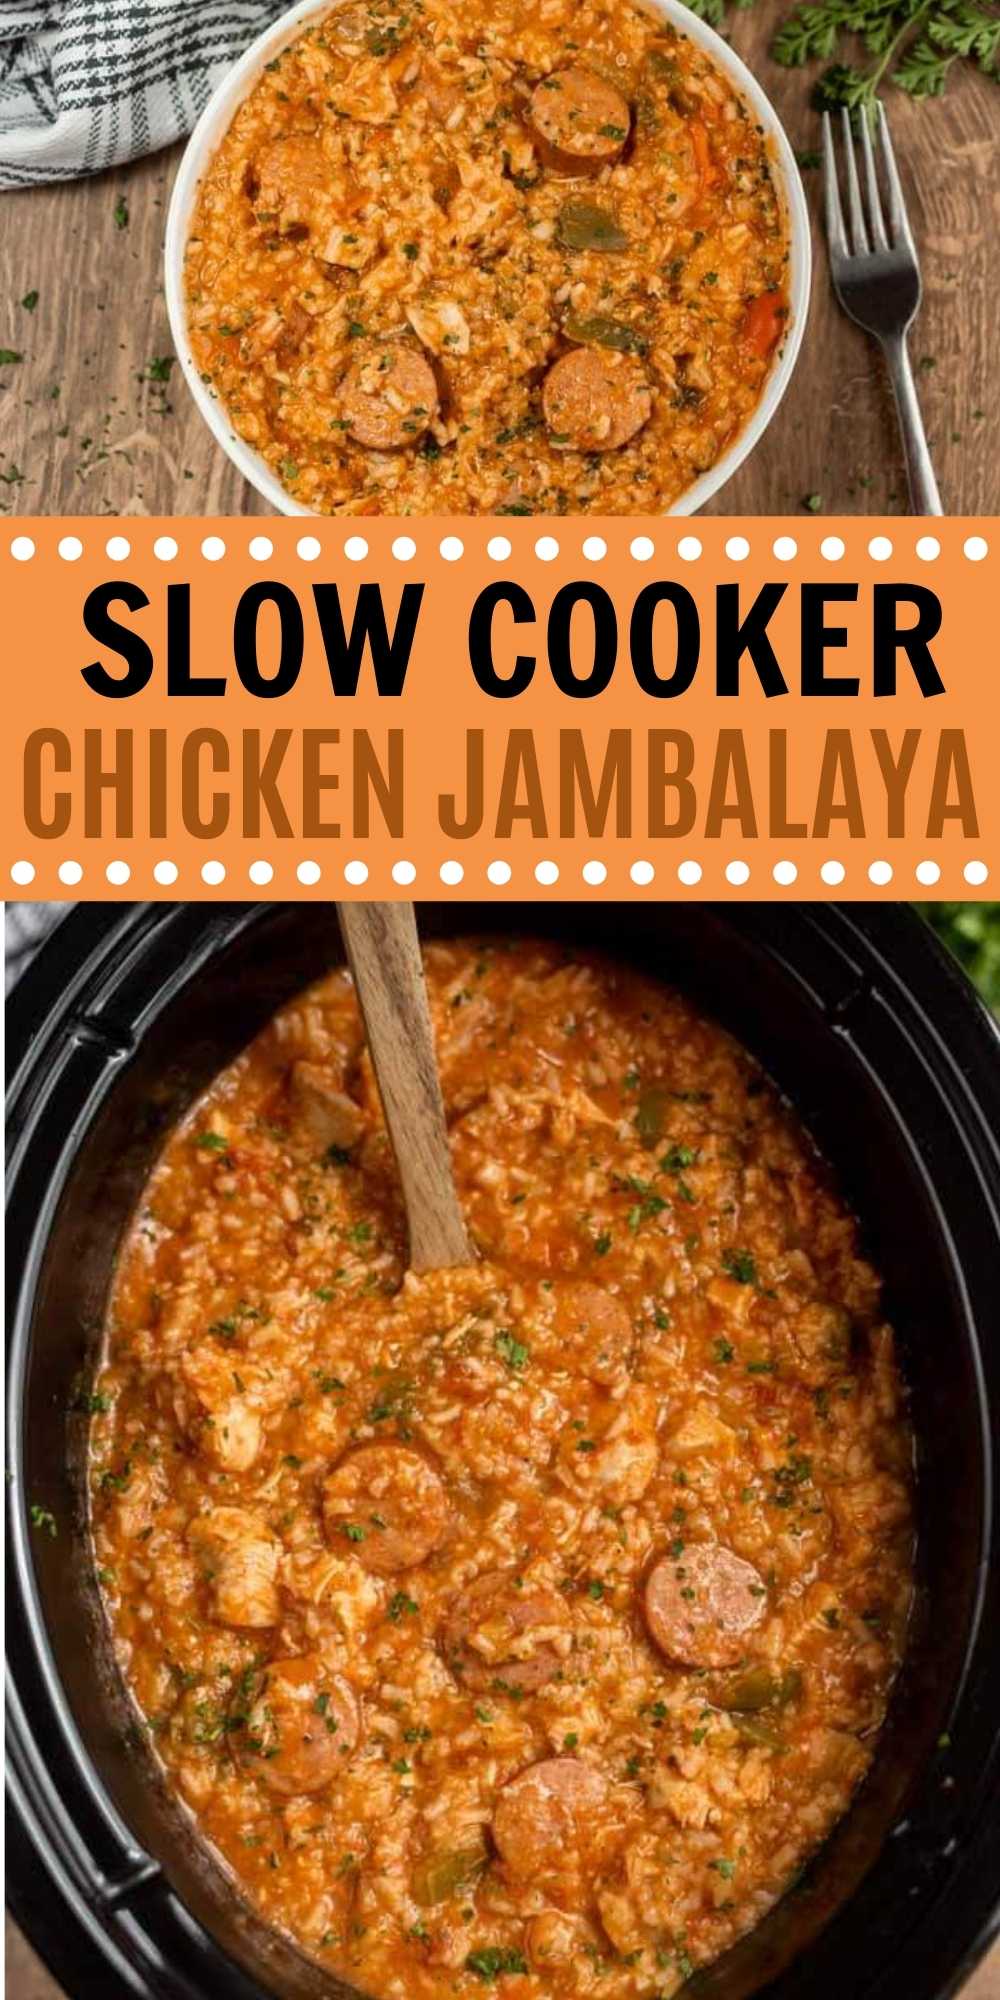 Crock Pot Jambalaya is such a hearty meal with chicken and sausage. Packed with just enough heat to jazz it up but perfect for the entire family to enjoy. This slow cooker chicken and sausage jambalaya is easy to make and packed with tons of flavor too! #eatingonadime #crockpotrecipes #slowcookerrecipes #chickenrecipes #cajunrecipes 